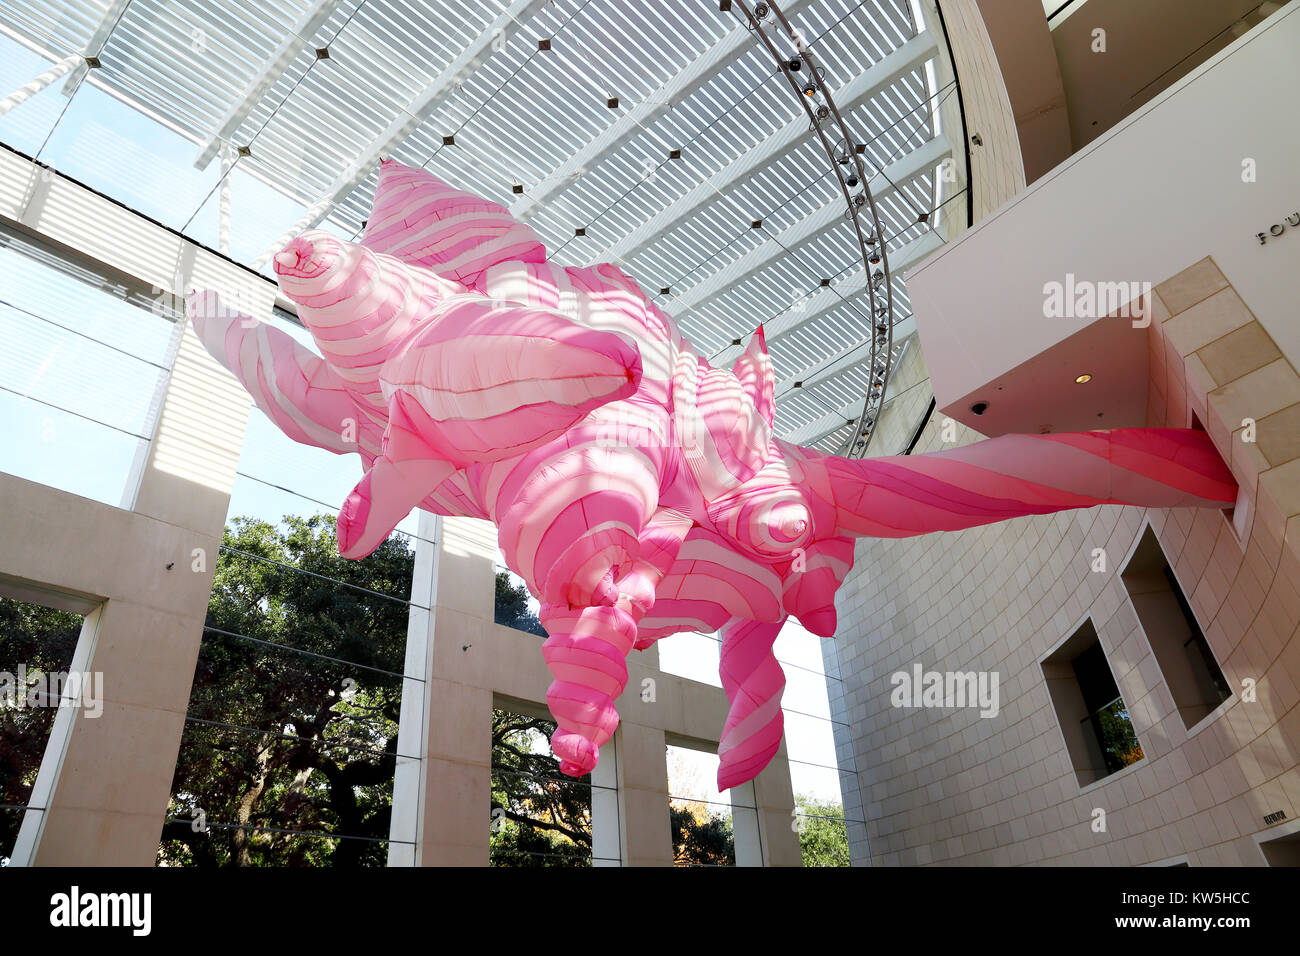 A large inflatable installation piece by artist Anne Ferrer hangs from the cieling of the Jepson Center Eckburg Atrium in Savannah Georgia. Stock Photo